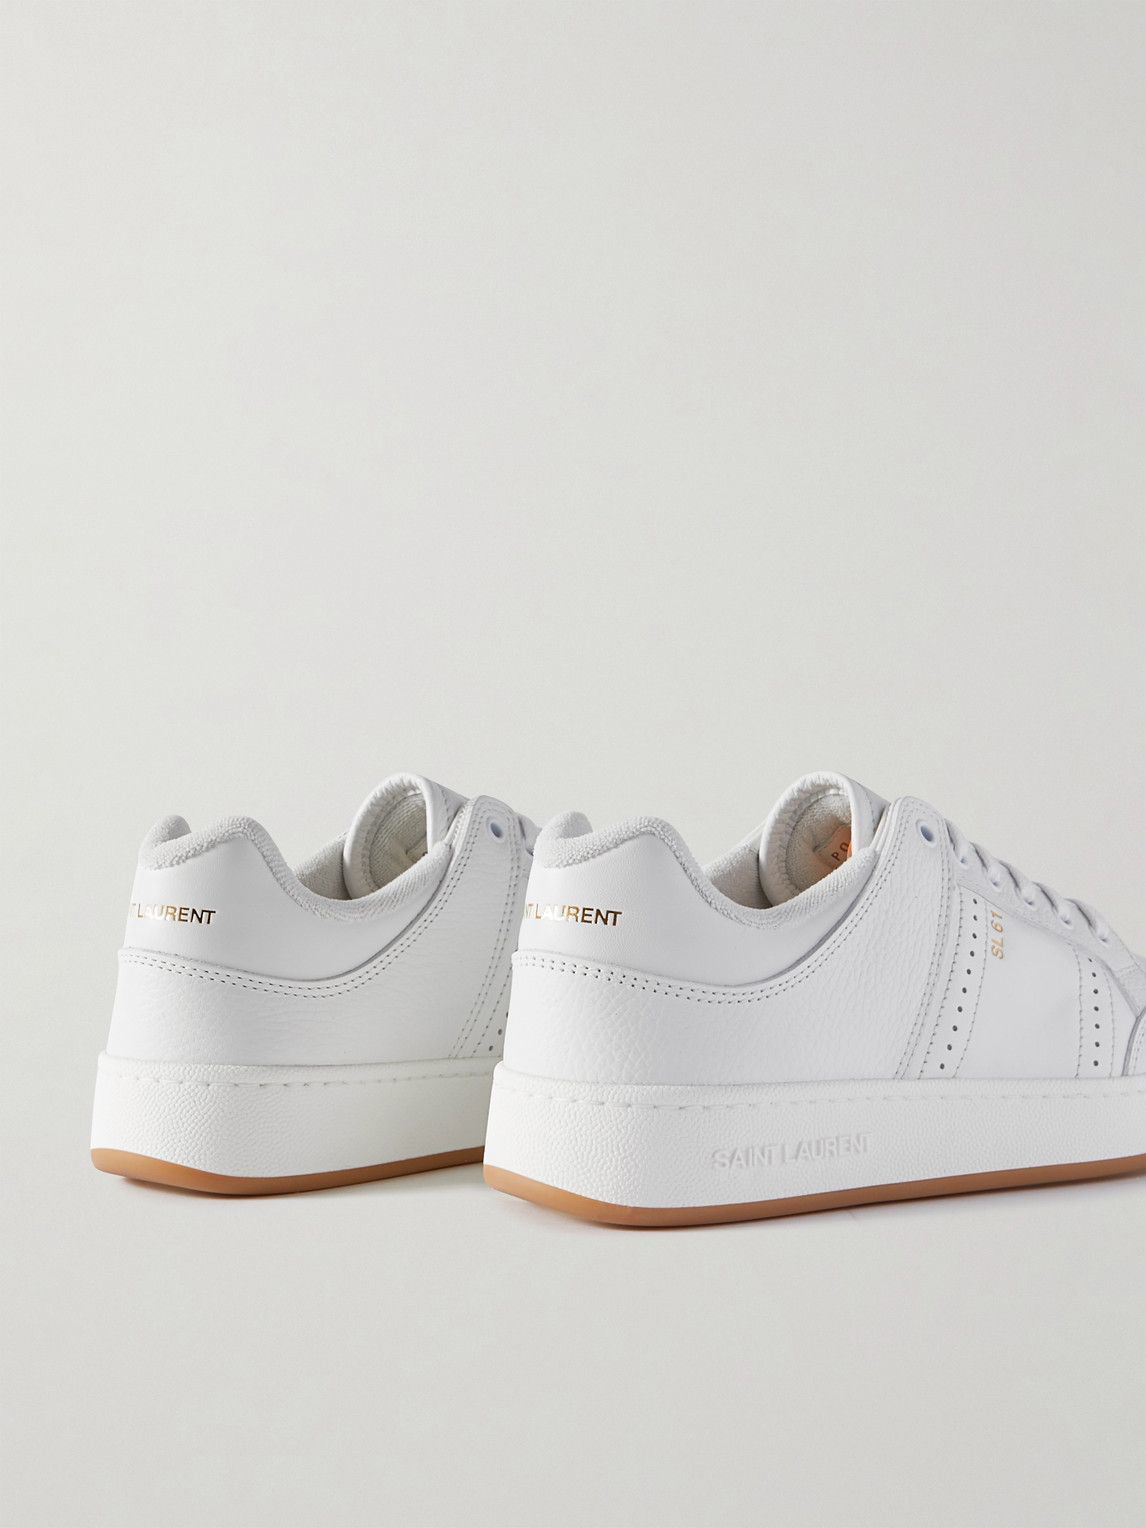 SL/61 low-top sneakers in perforated leather, Saint Laurent